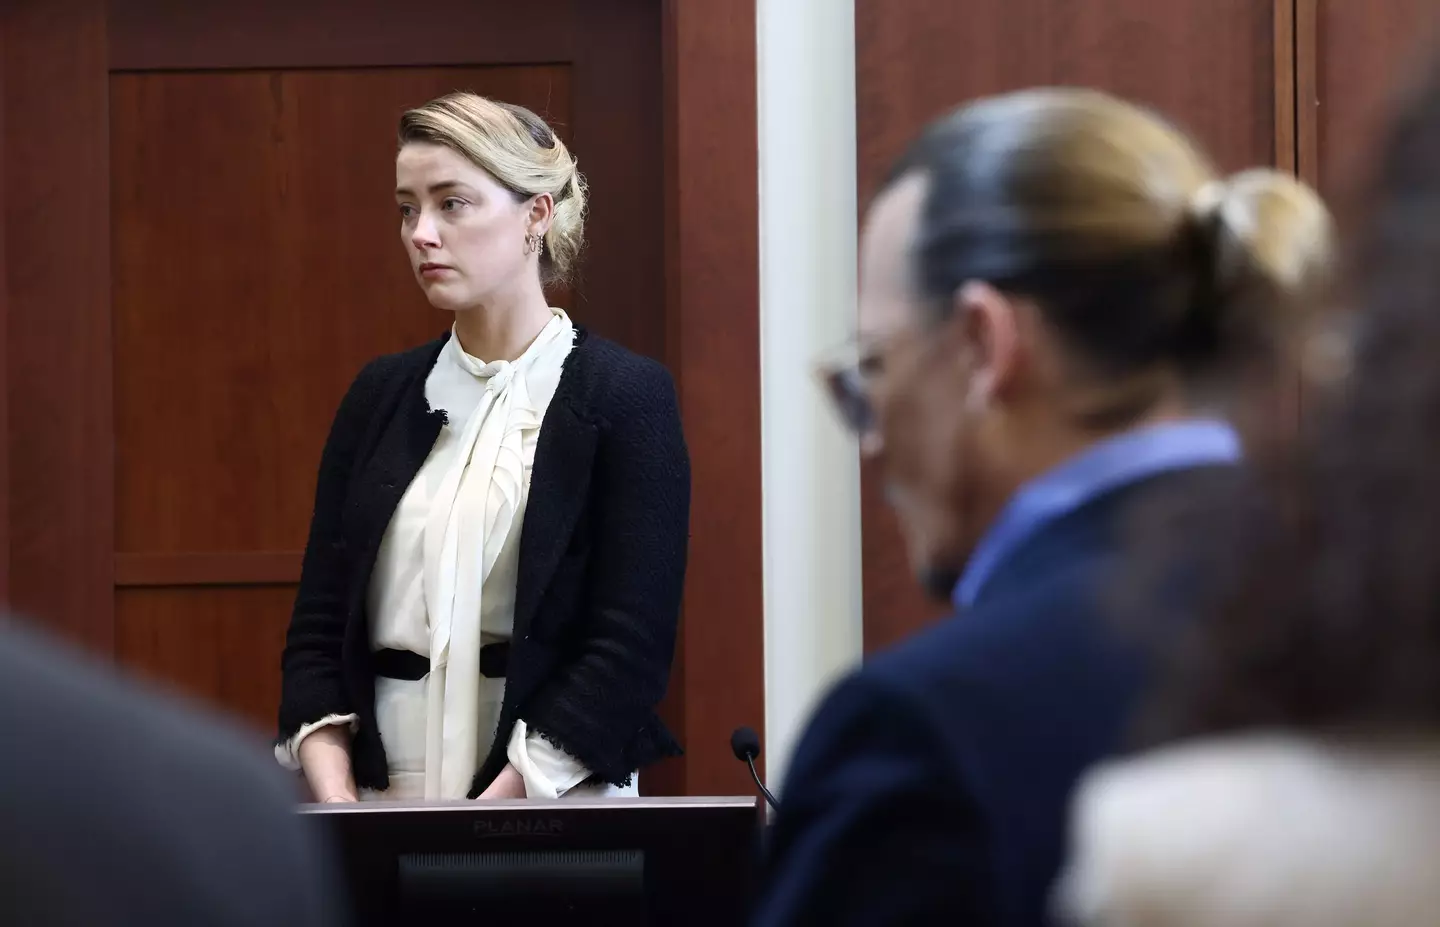 Amber Heard was asked to explain why Johnny Depp does not look at her in court. (